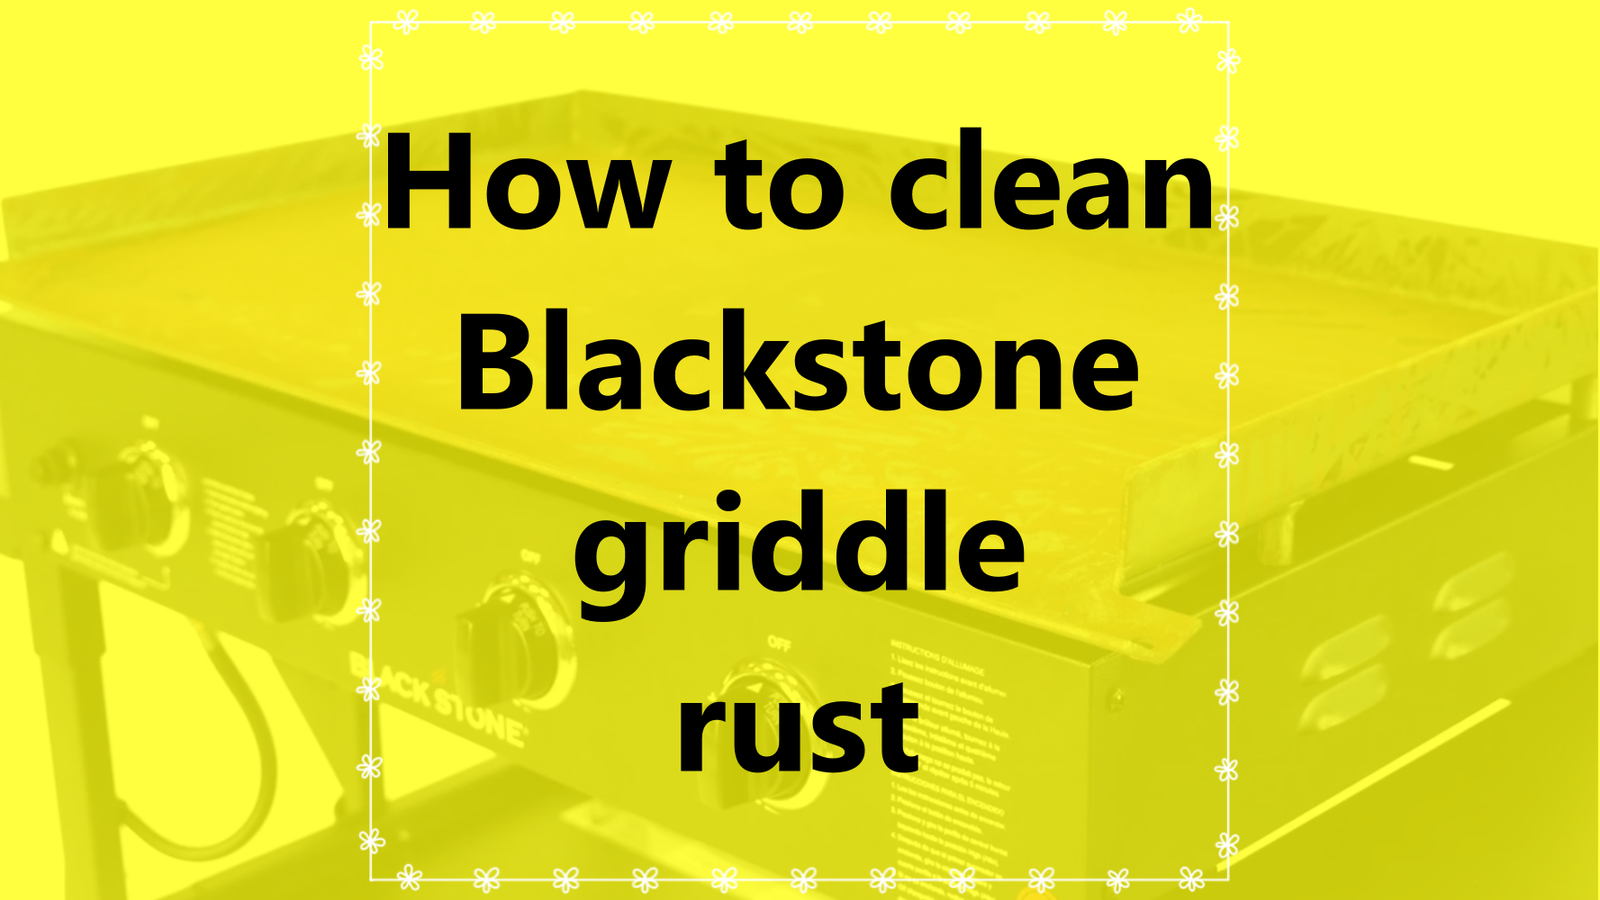 How to clean Blackstone griddle rust